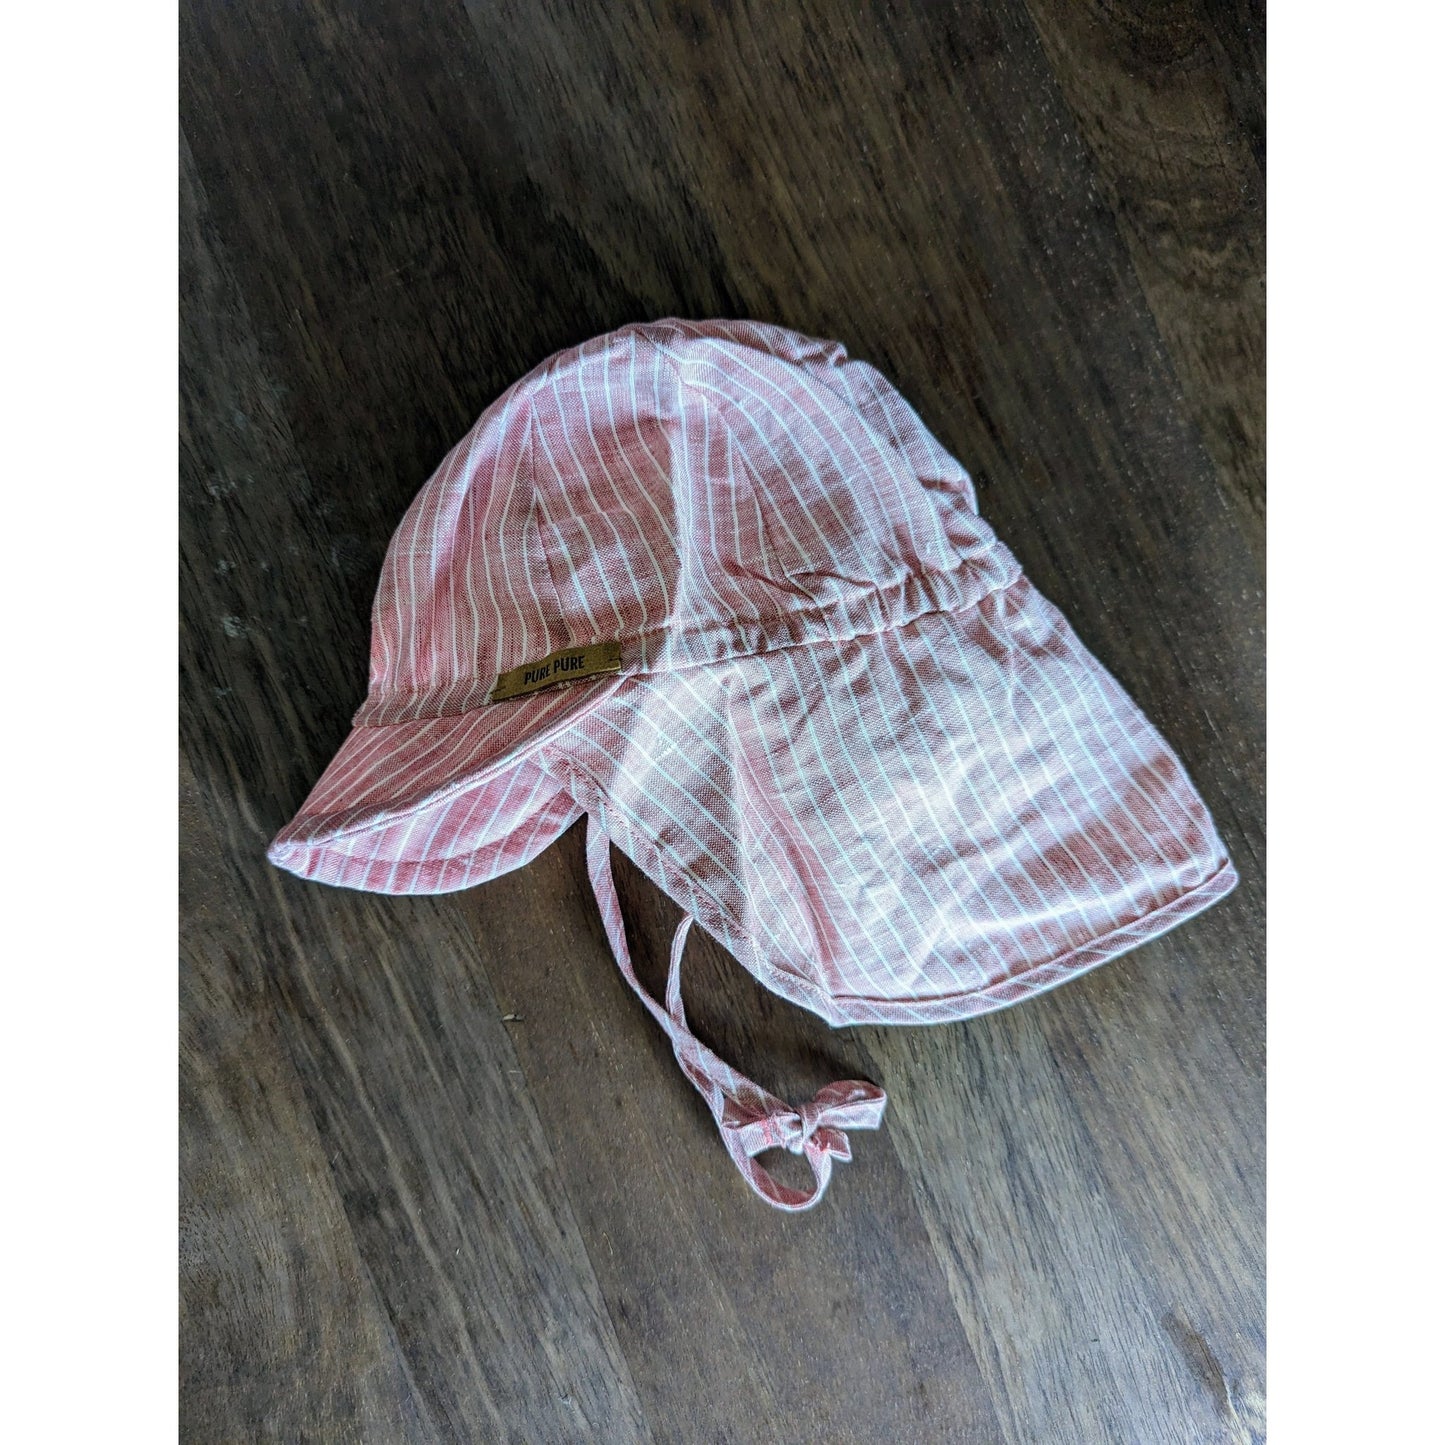 Baseball Cap - Linen Sun Hat with Neck Protection - Baby and Kids (3 colors) - Nature's Wild Child